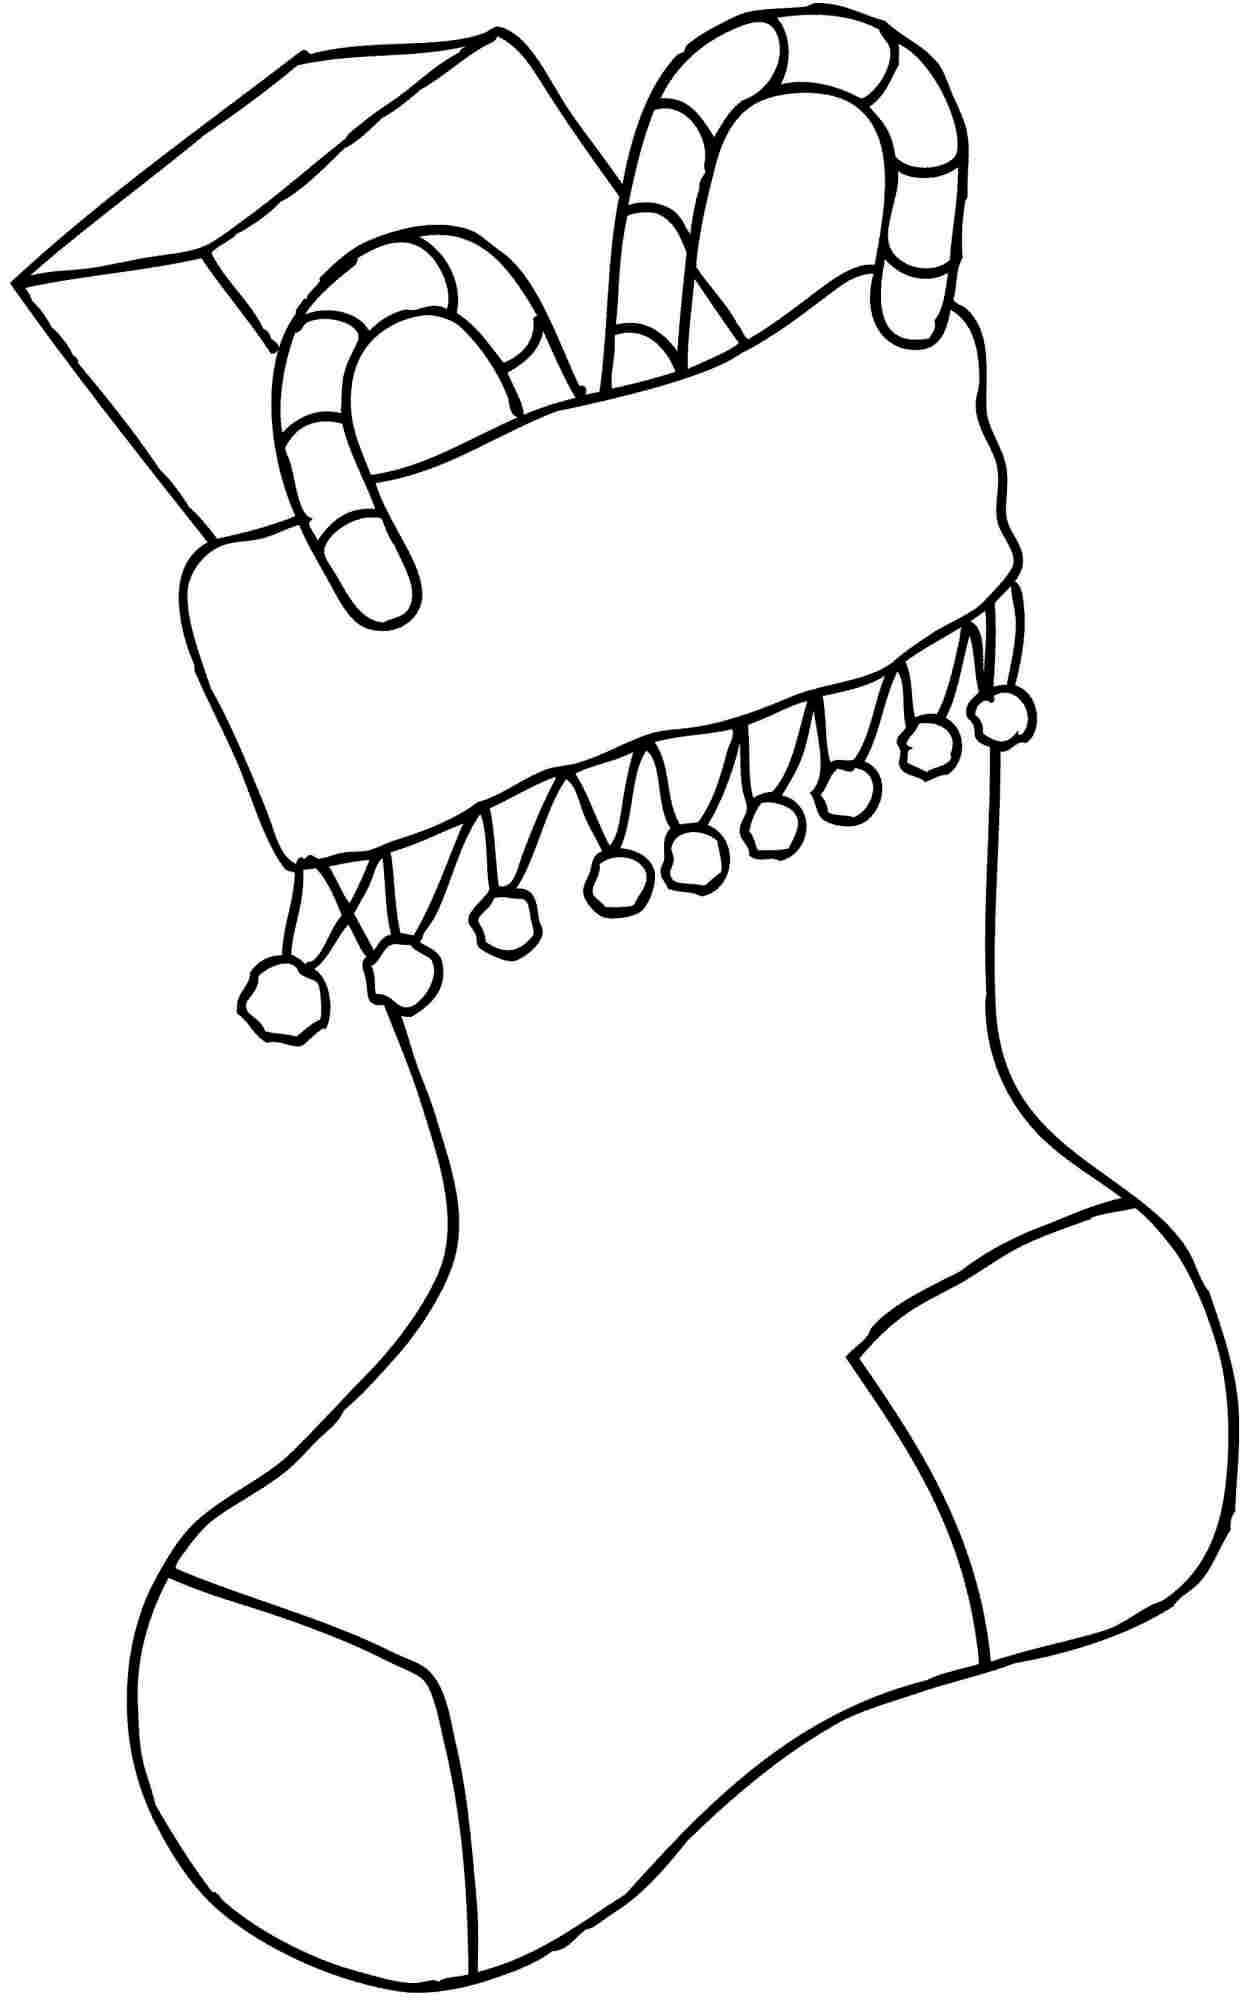 Christmas Stocking Coloring Page for Preschoolers